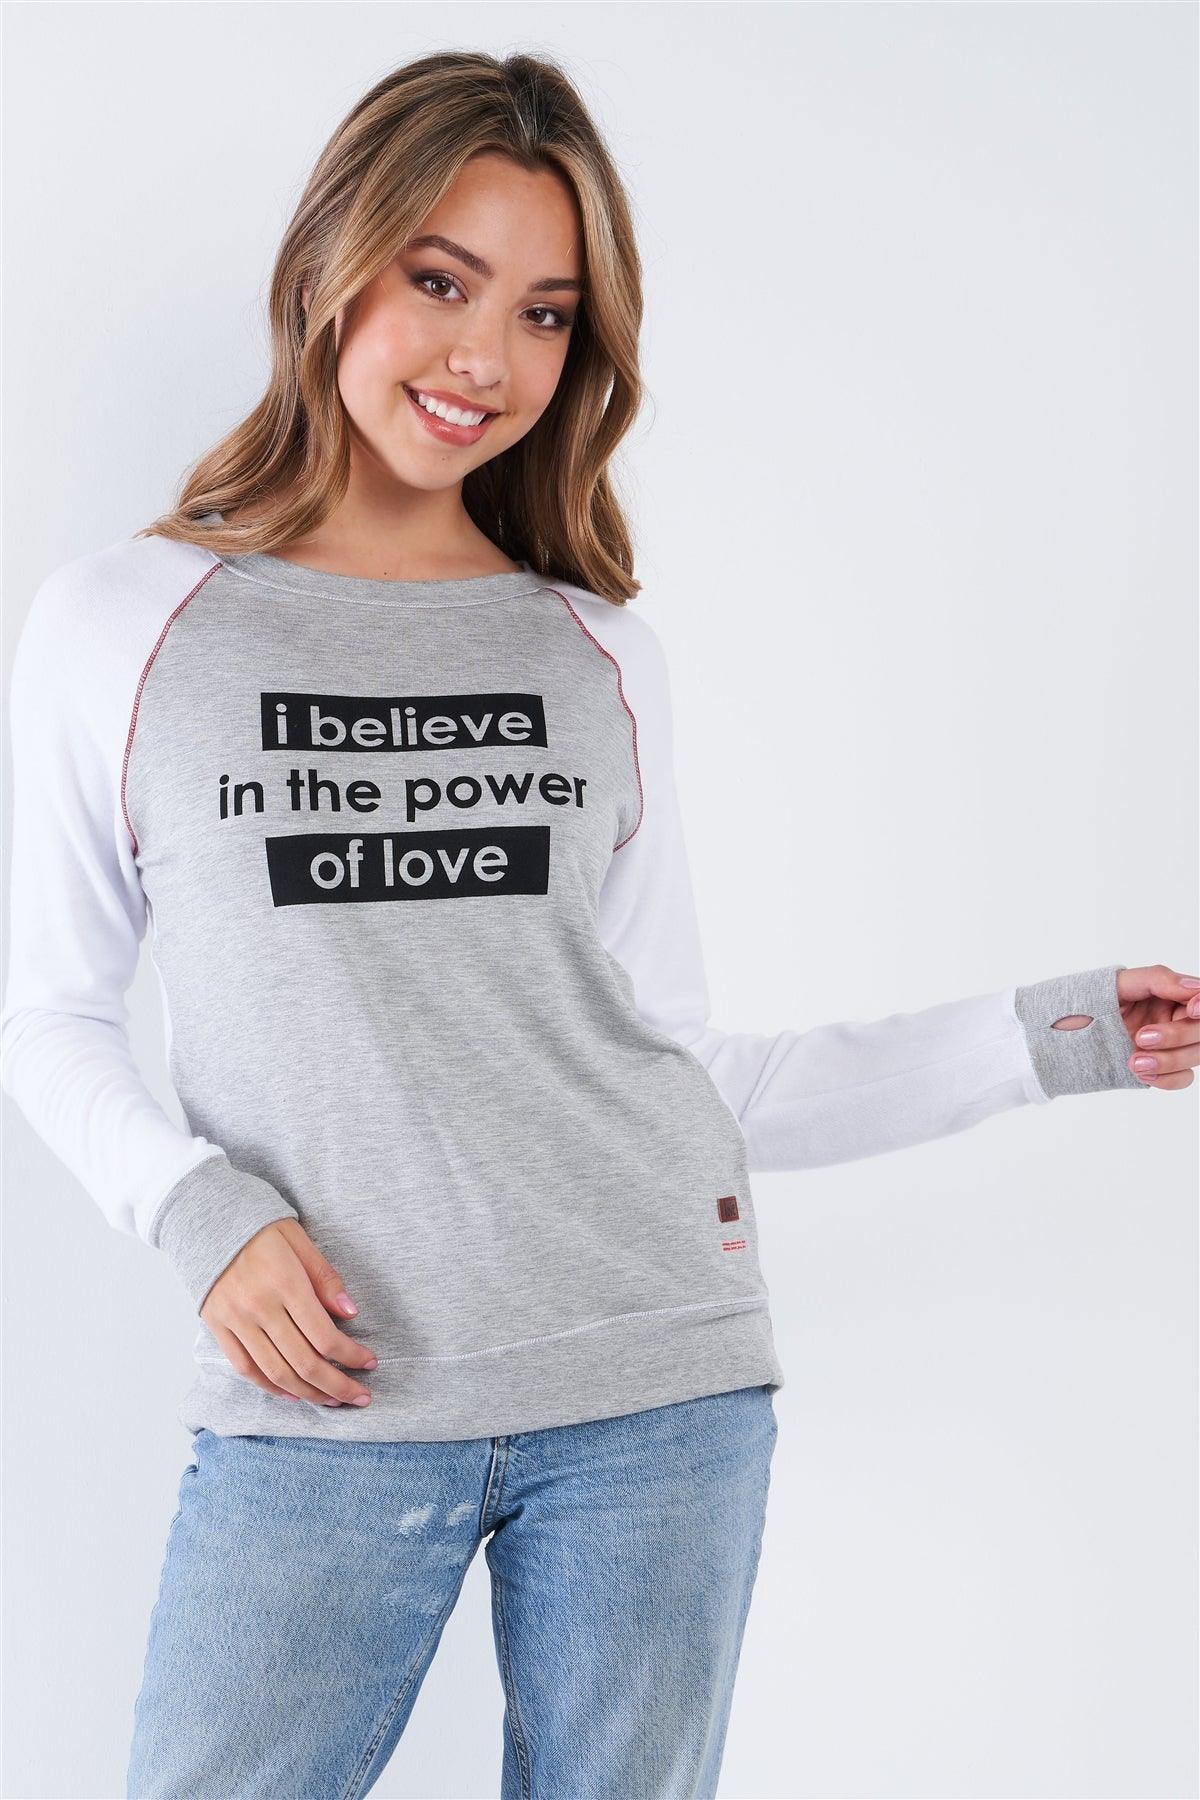 White Heather Long Sleeve "I Believe In The Power Of Love" Comfy Crew Neck Top